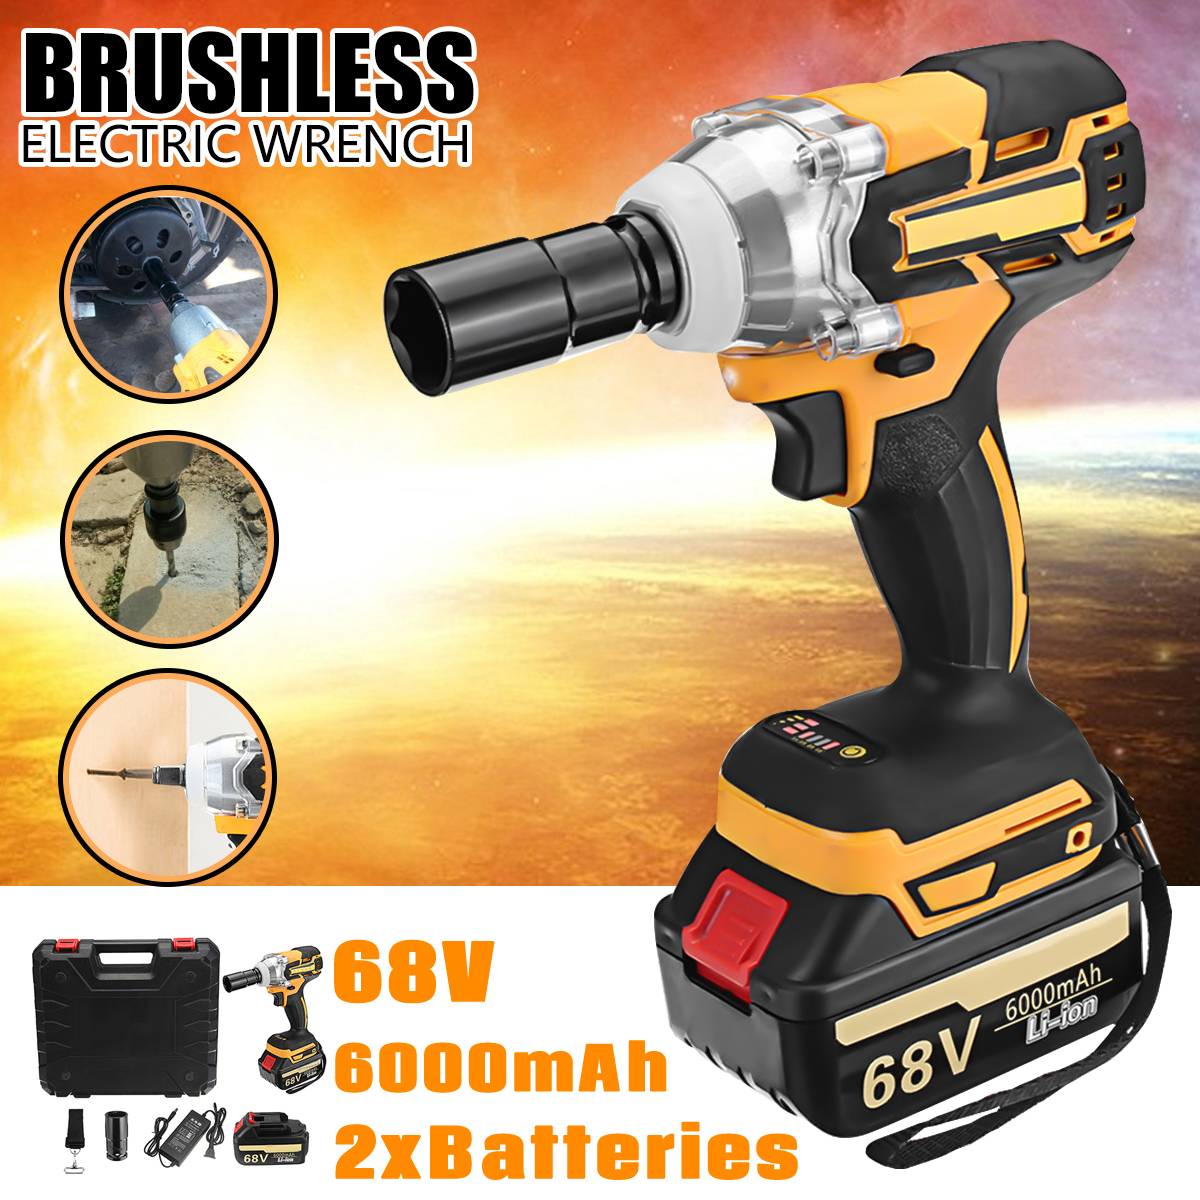 68V-6000mAh-Electric-Wrench-2-Batteries-1-Charger-Brushless-Cordless-Drive-Impact-Wrench-Tools-1282965-2